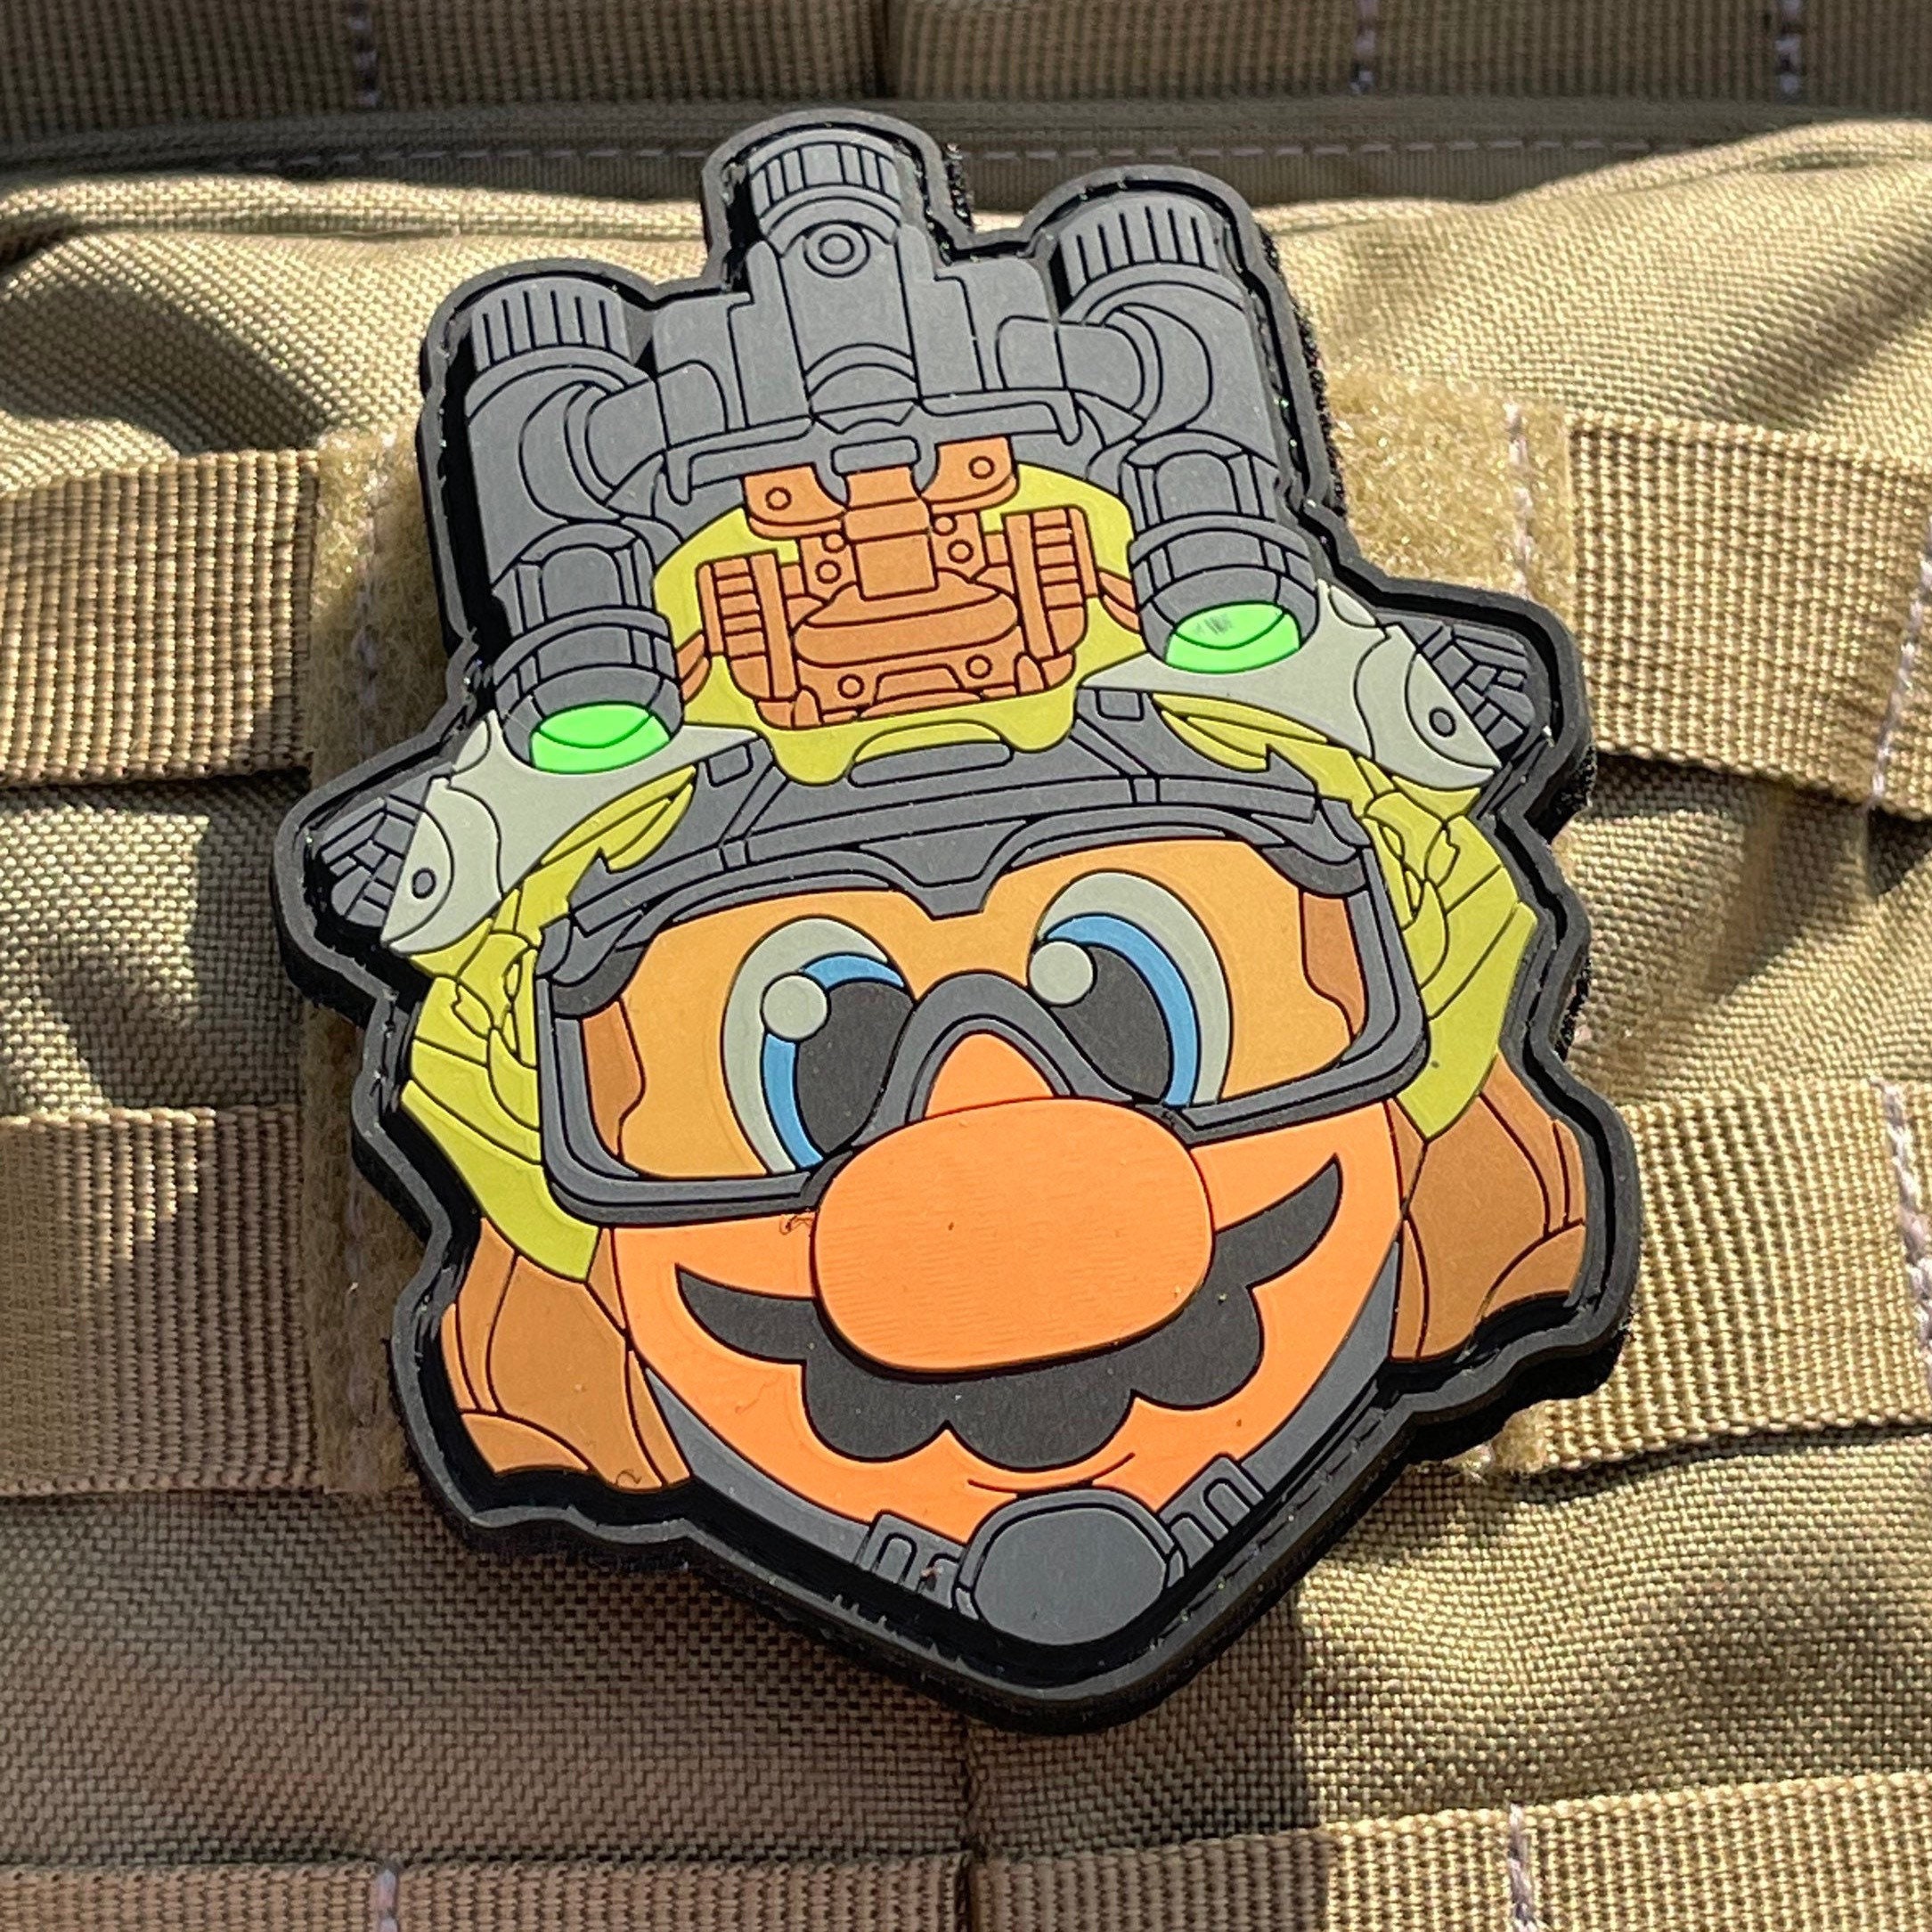  Tactical Peach Military Morale Hook and Loop Patch